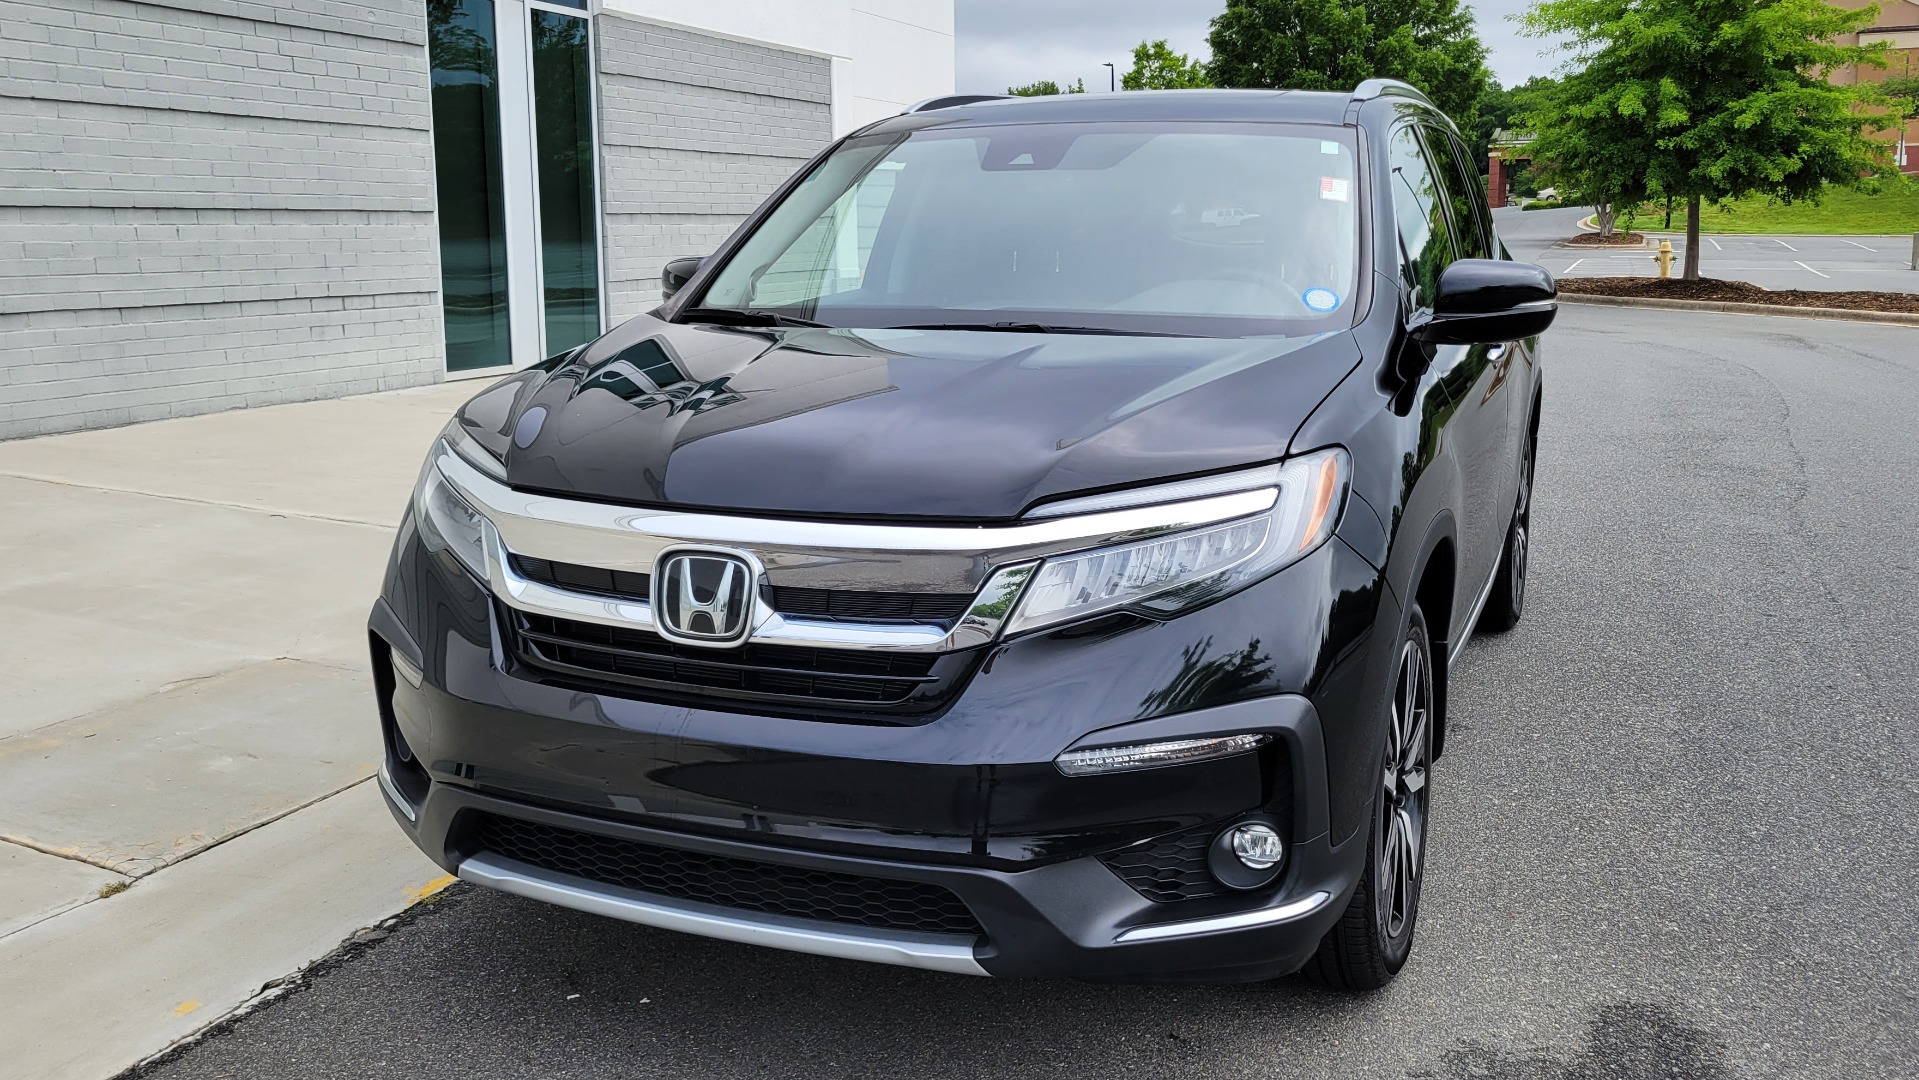 Used 2020 Honda PILOT TOURING 7-PASSENGER / NAV / SUNROOF / ENTERTAINMENT / 3-ROW for sale Sold at Formula Imports in Charlotte NC 28227 2